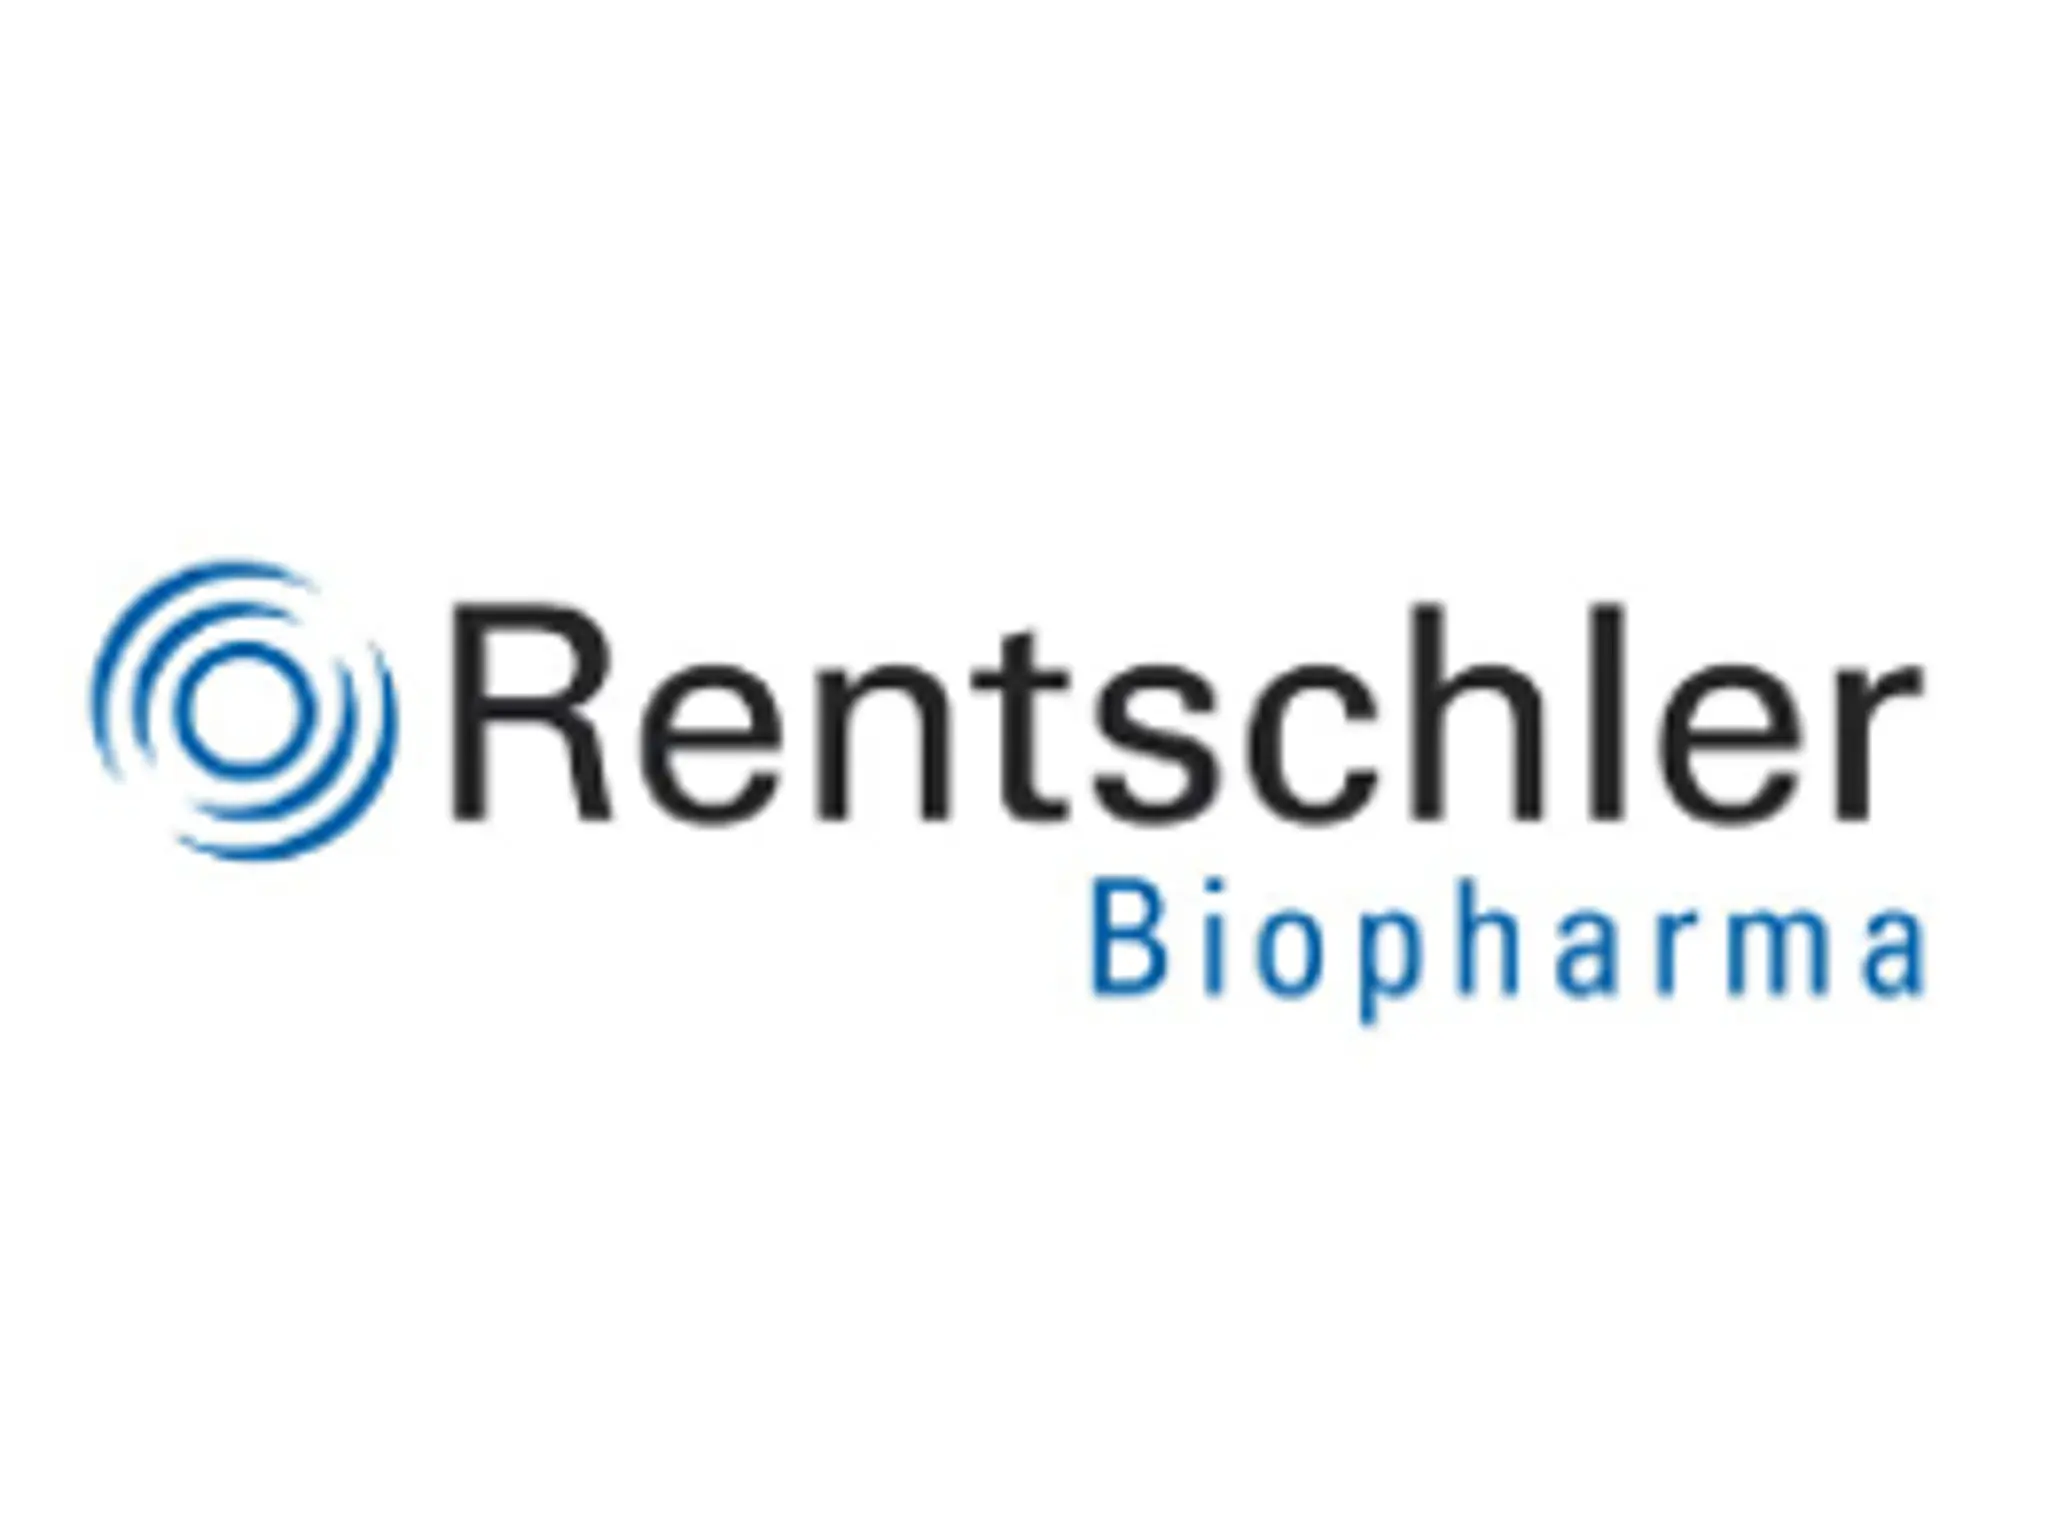 Dr. Björn Beckmann Appointed Head of Quality Control at Rentschler Biopharma’s Laupheim Site